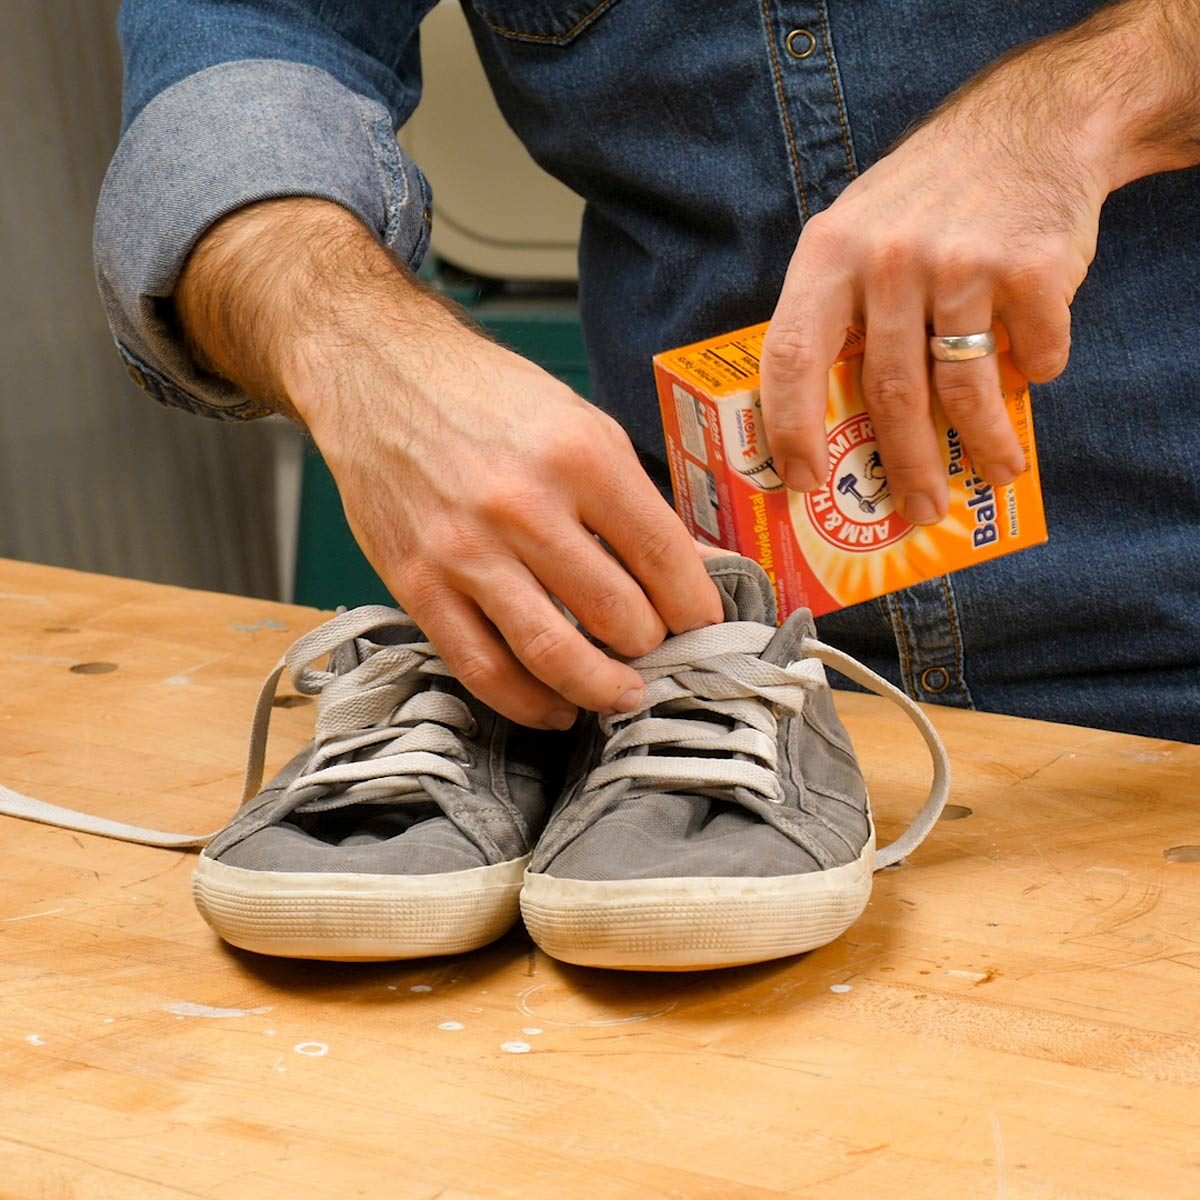 baking soda and water to clean shoes